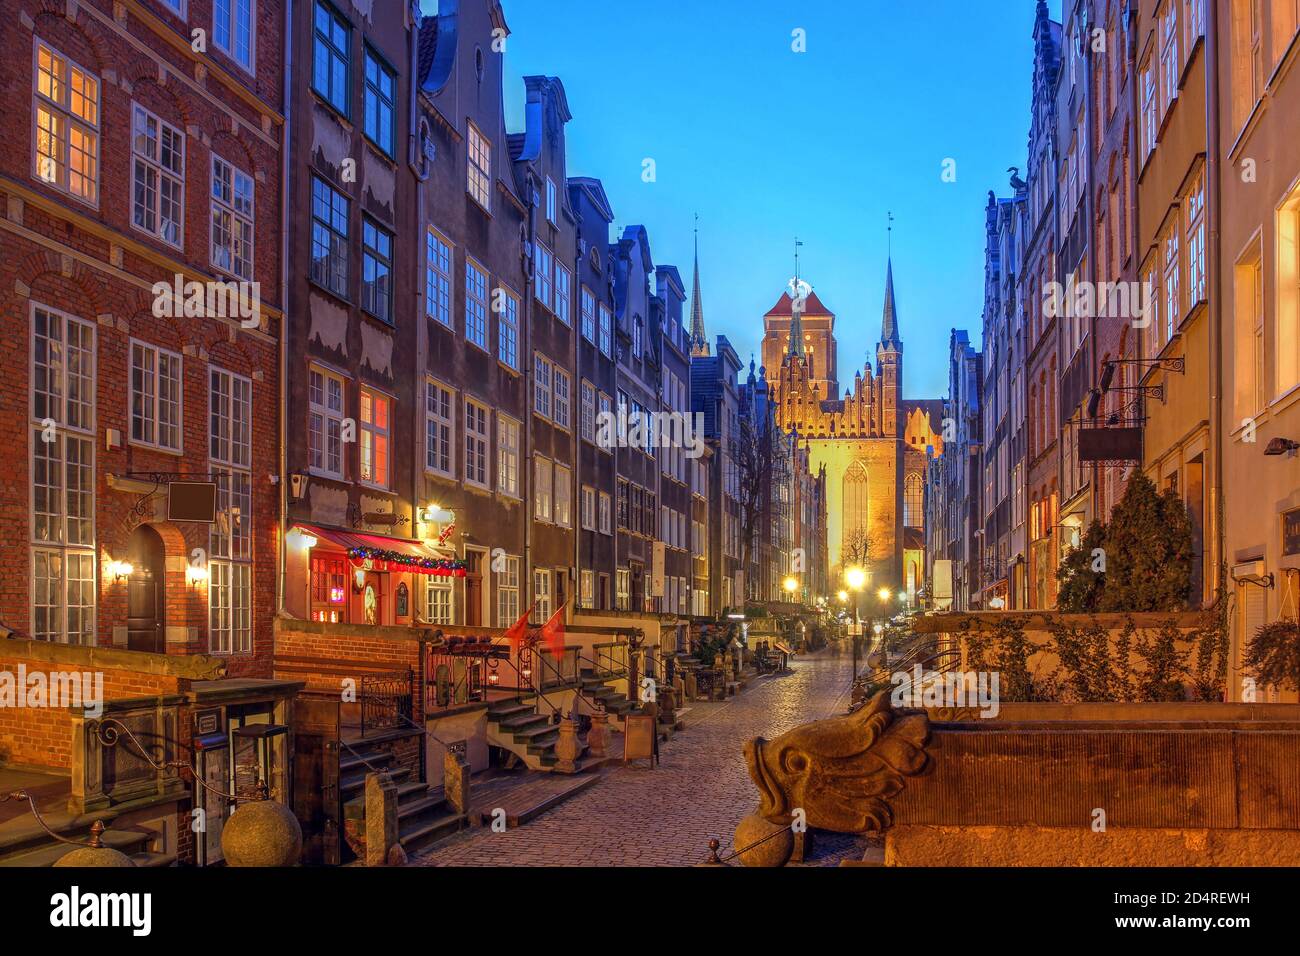 Night scene along the historical Mariacka Street in Gdansk, Poland towered by the St Mary Church (Basilica of the Assumption of the Blessed Virgin Mar Stock Photo